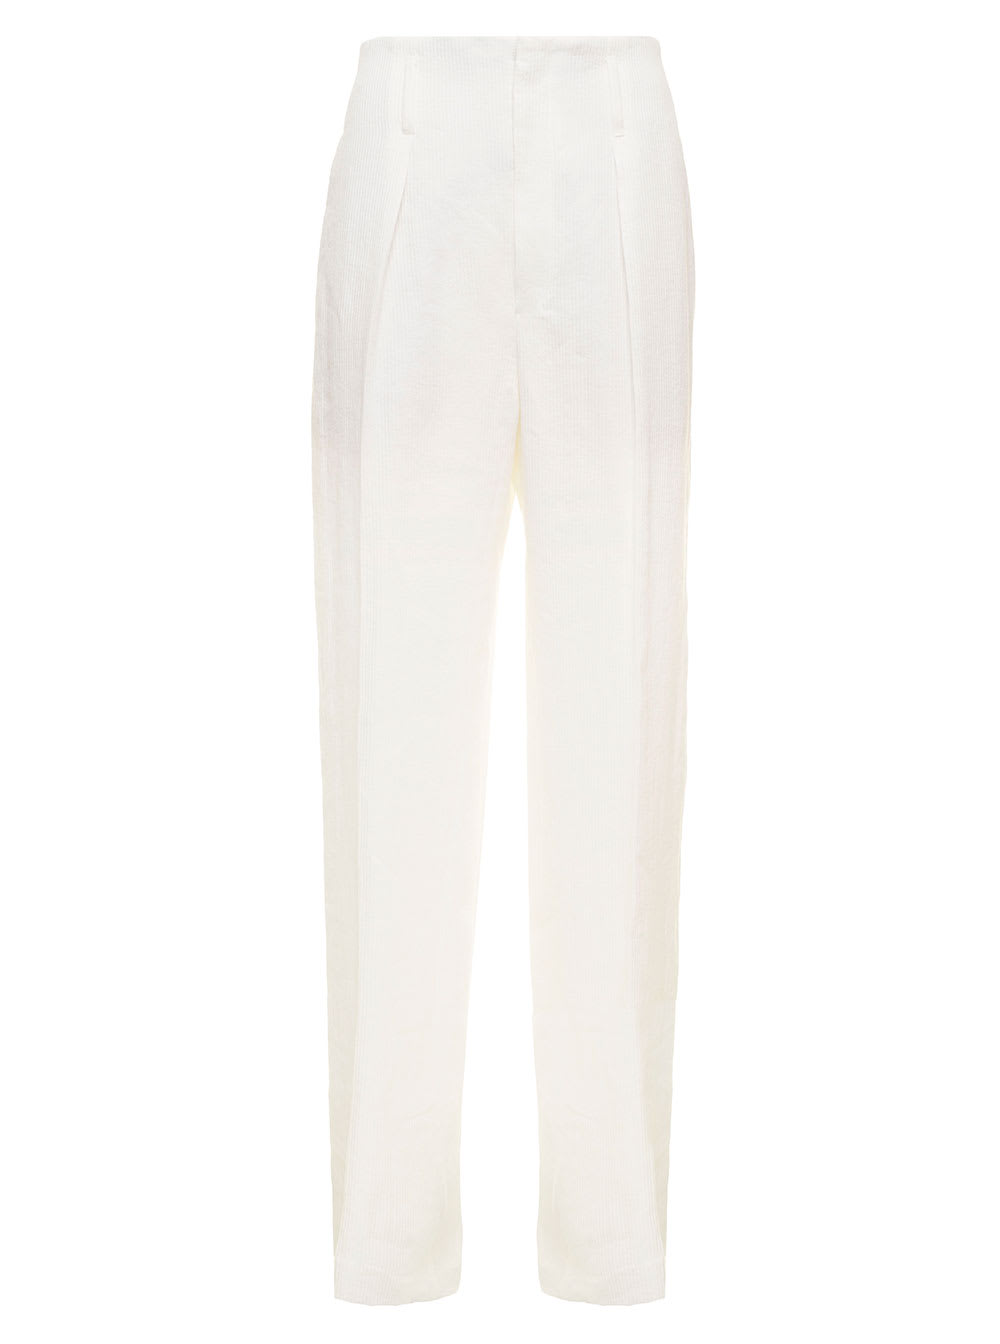 Brunello Cucinelli High Waist White Cotton And Linen Pants With Pence Brunello Cucinelli Woman